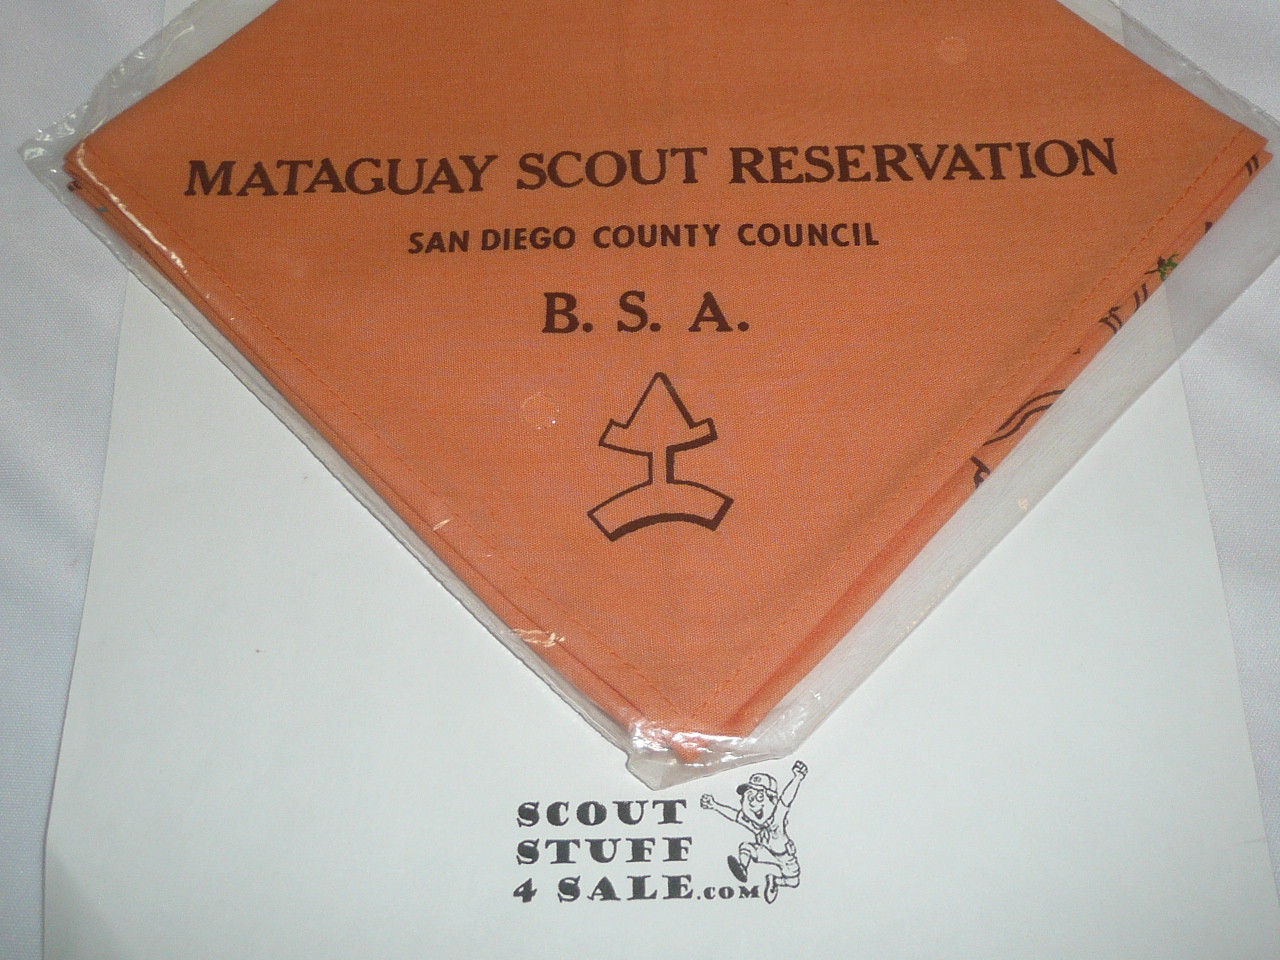 Mataguay Scout Reservation Neckerchief, San Diego County Council